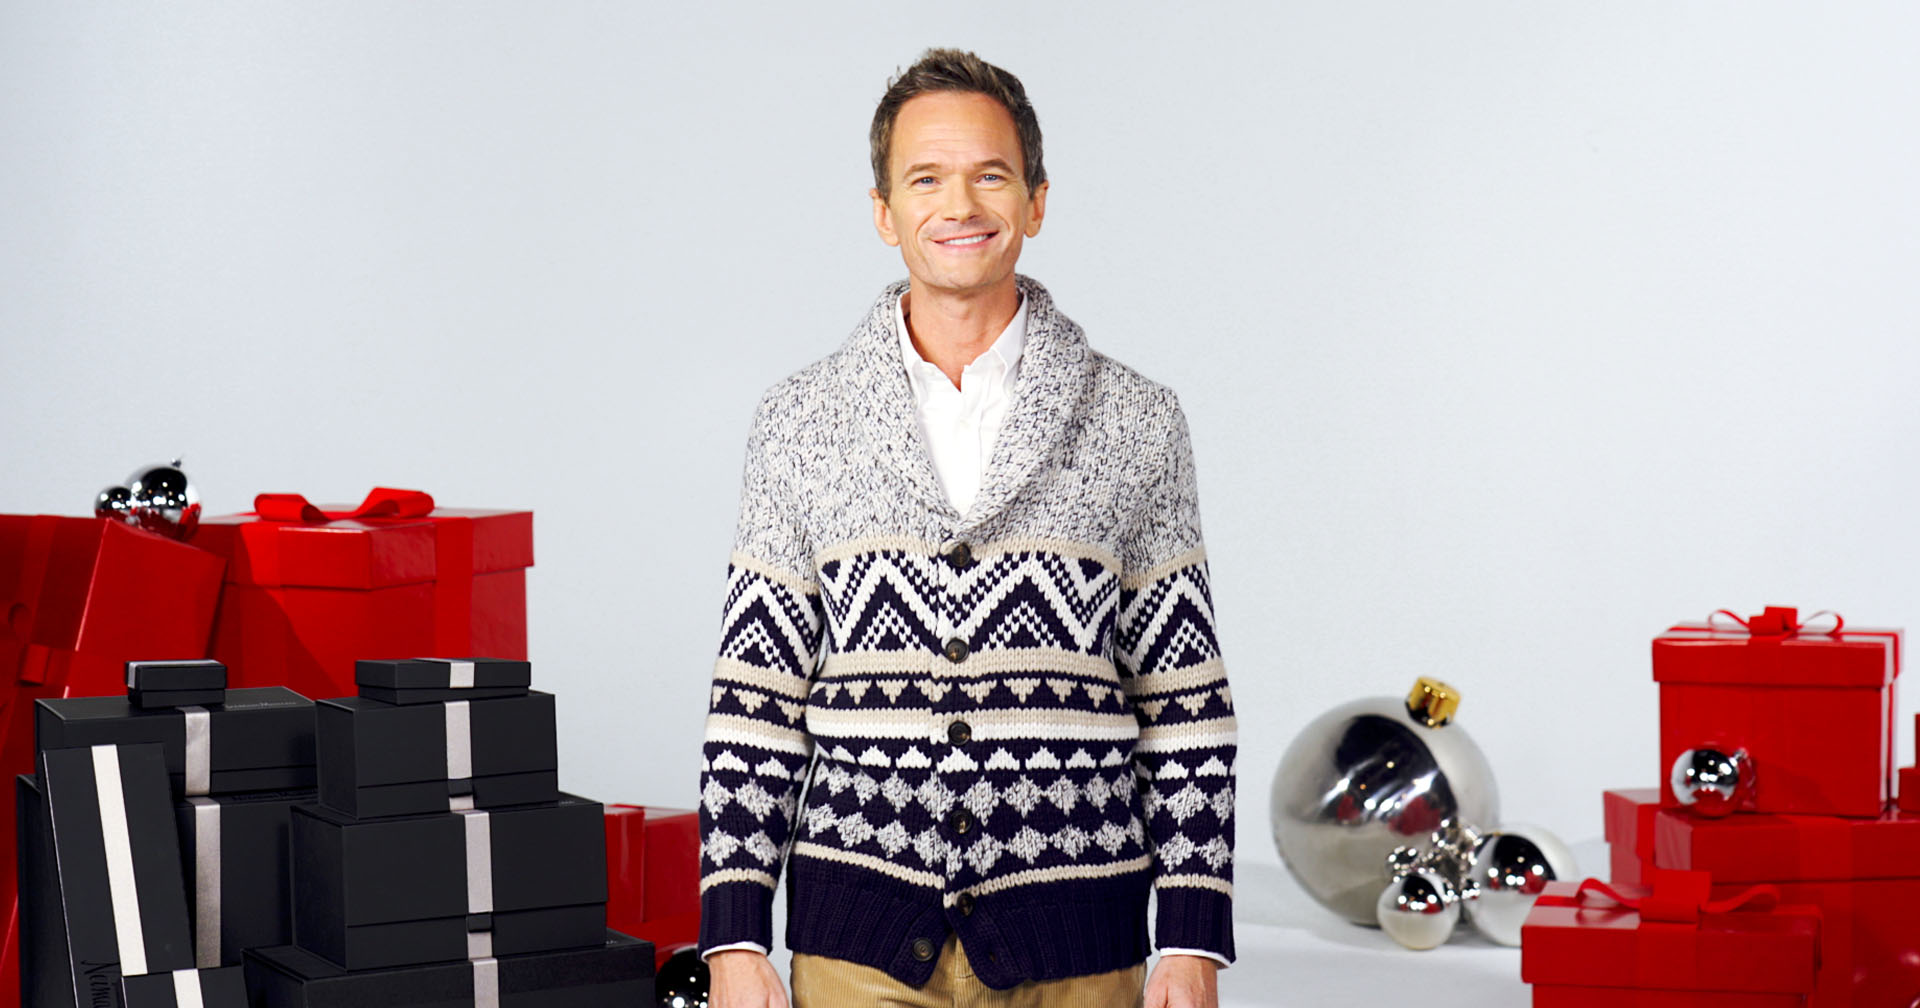 neil patrick harris surrounded by gift boxes wearing a cozy cardigan